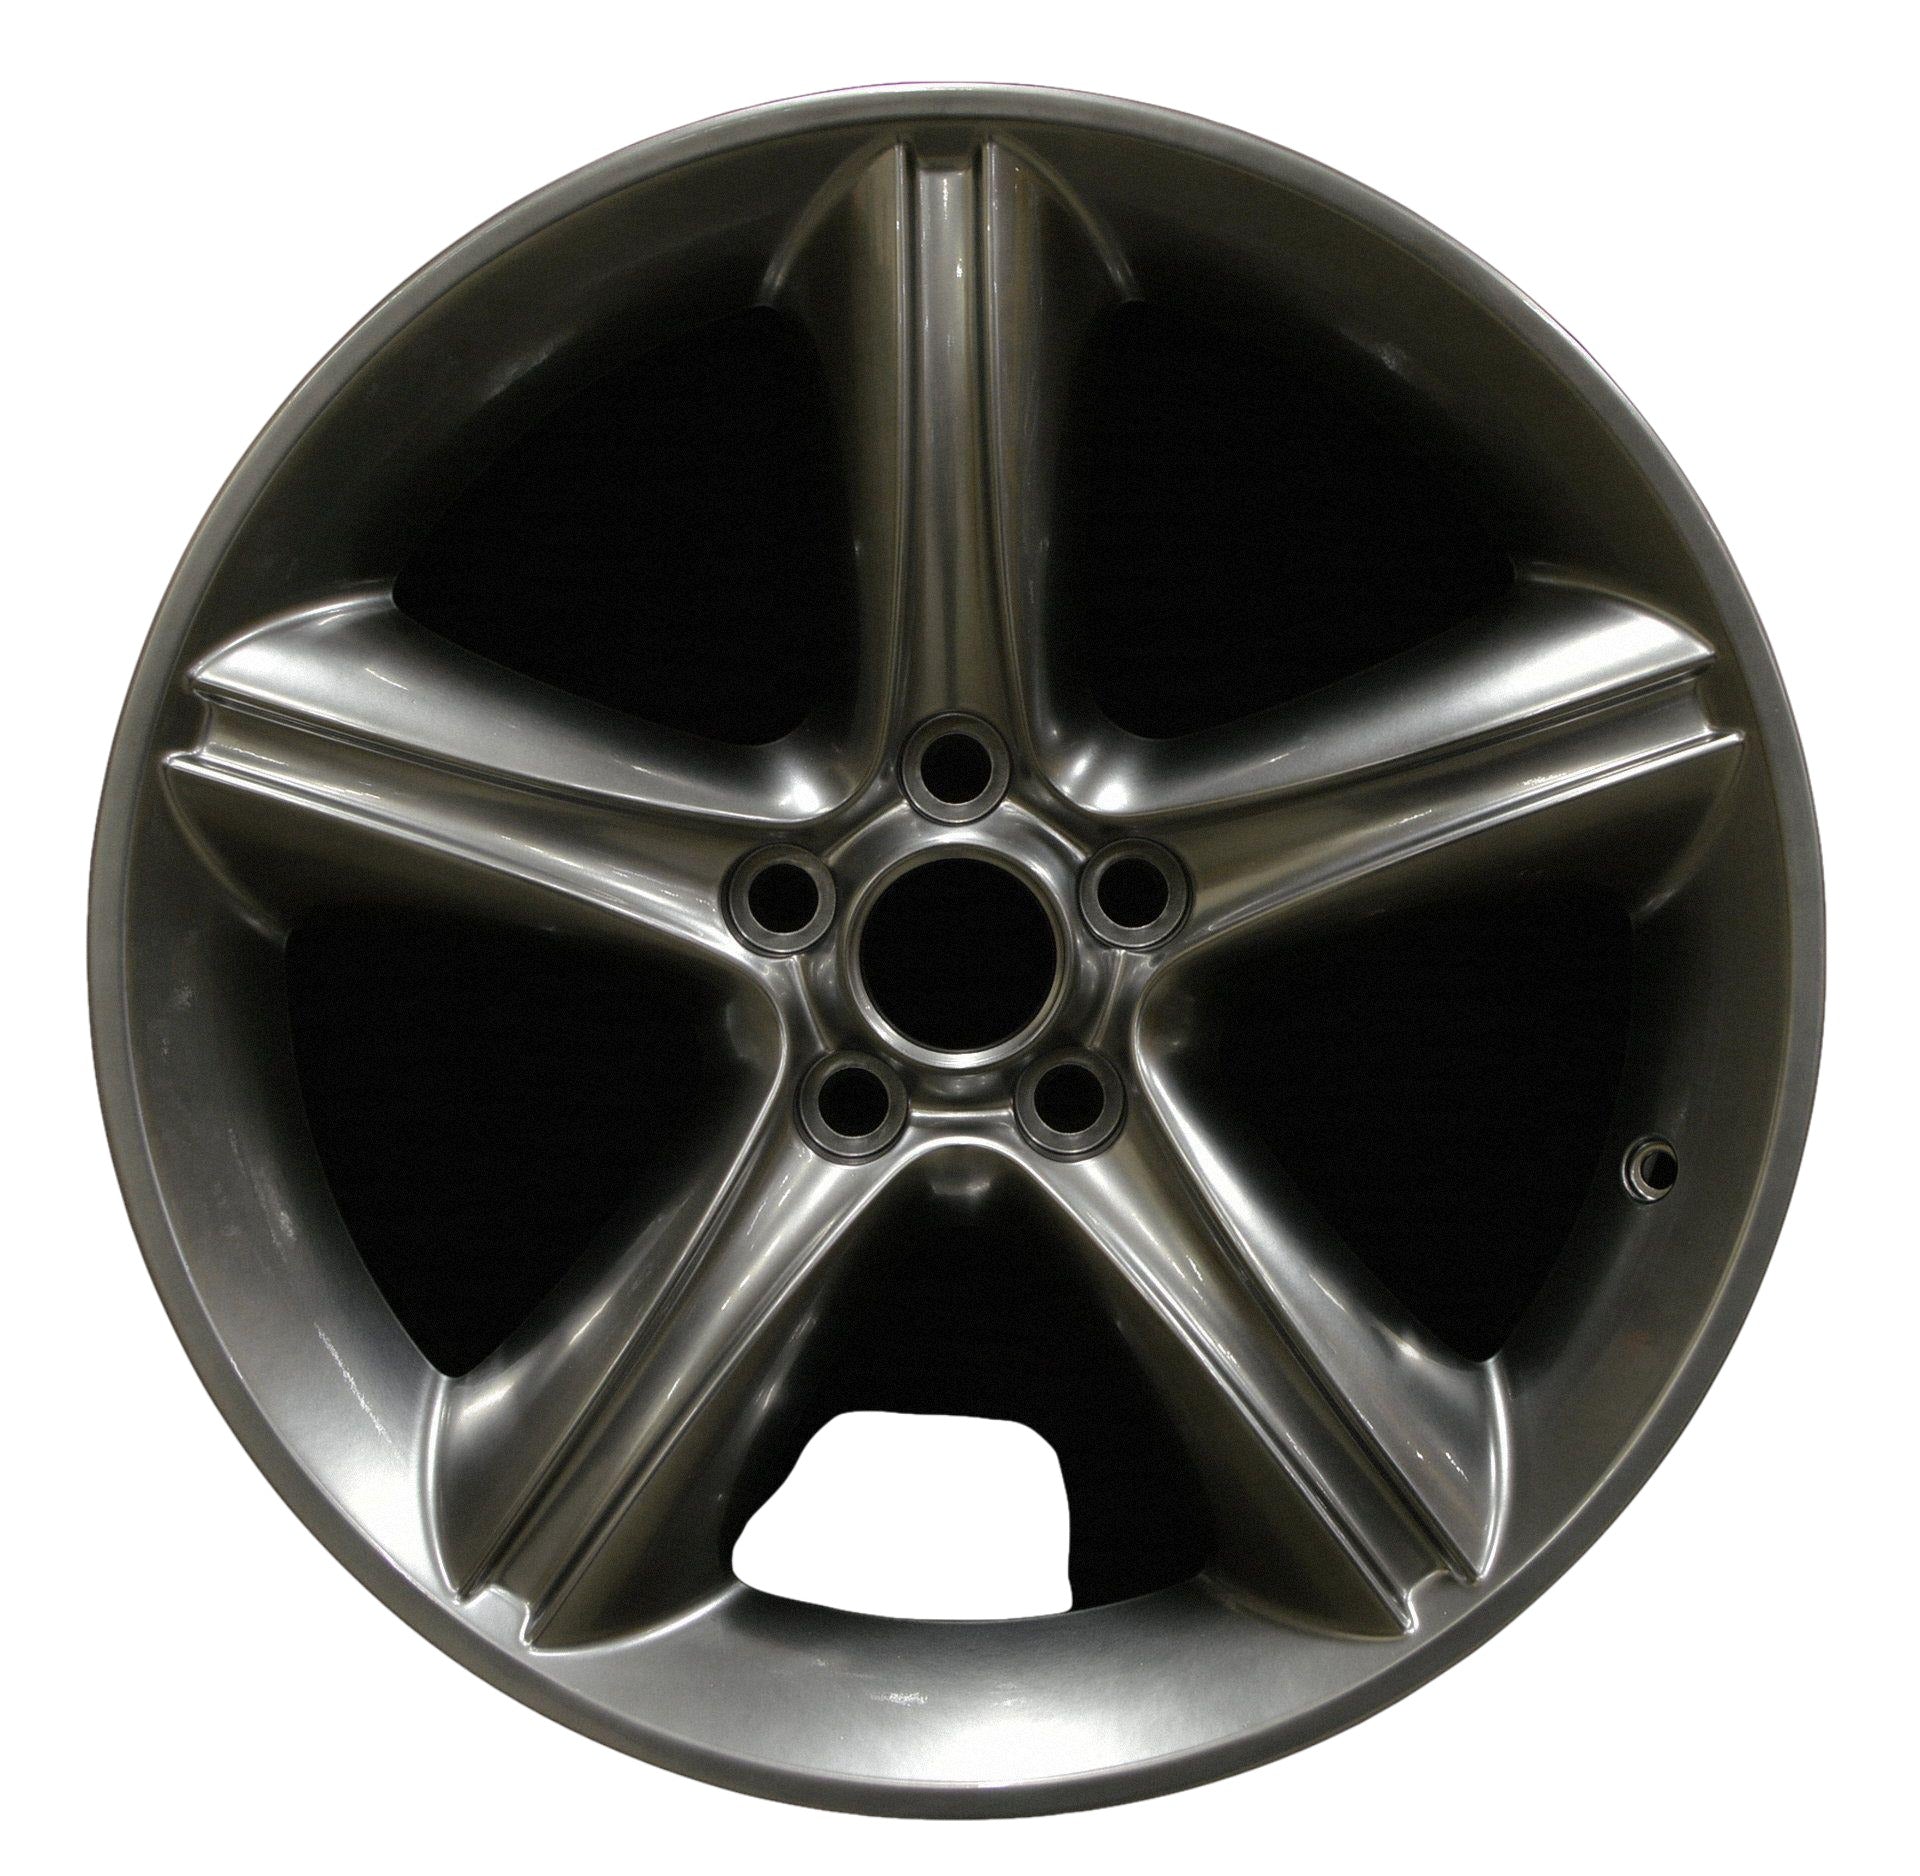 Ford Mustang  2010, 2011, 2012 Factory OEM Car Wheel Size 19x8.5 Alloy WAO.3812.HYPV2.FF